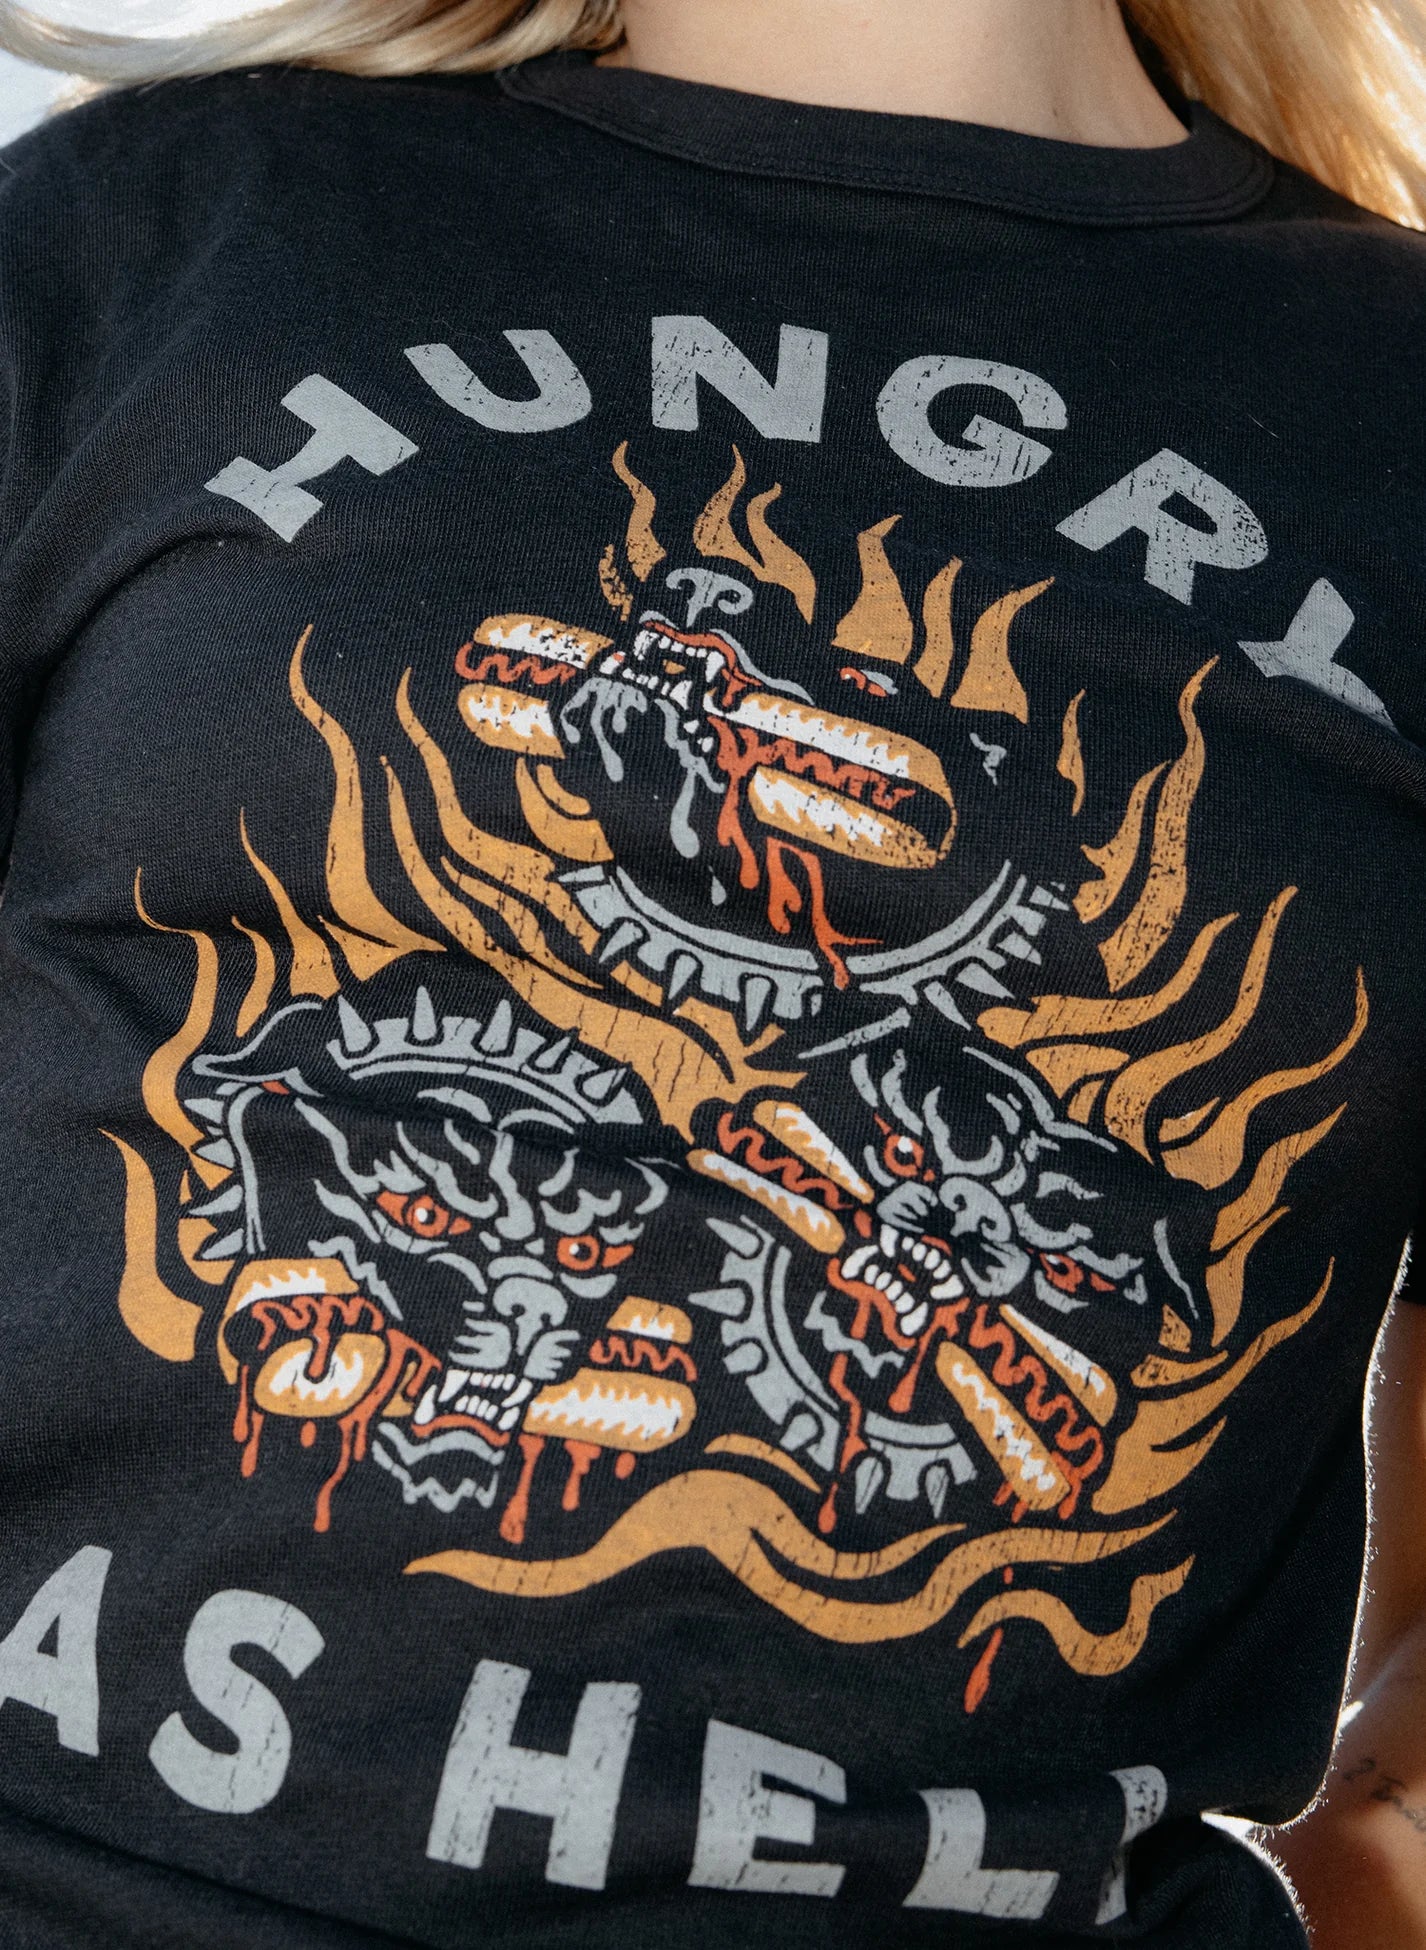 Hungry as Hell Tee by Pyknic